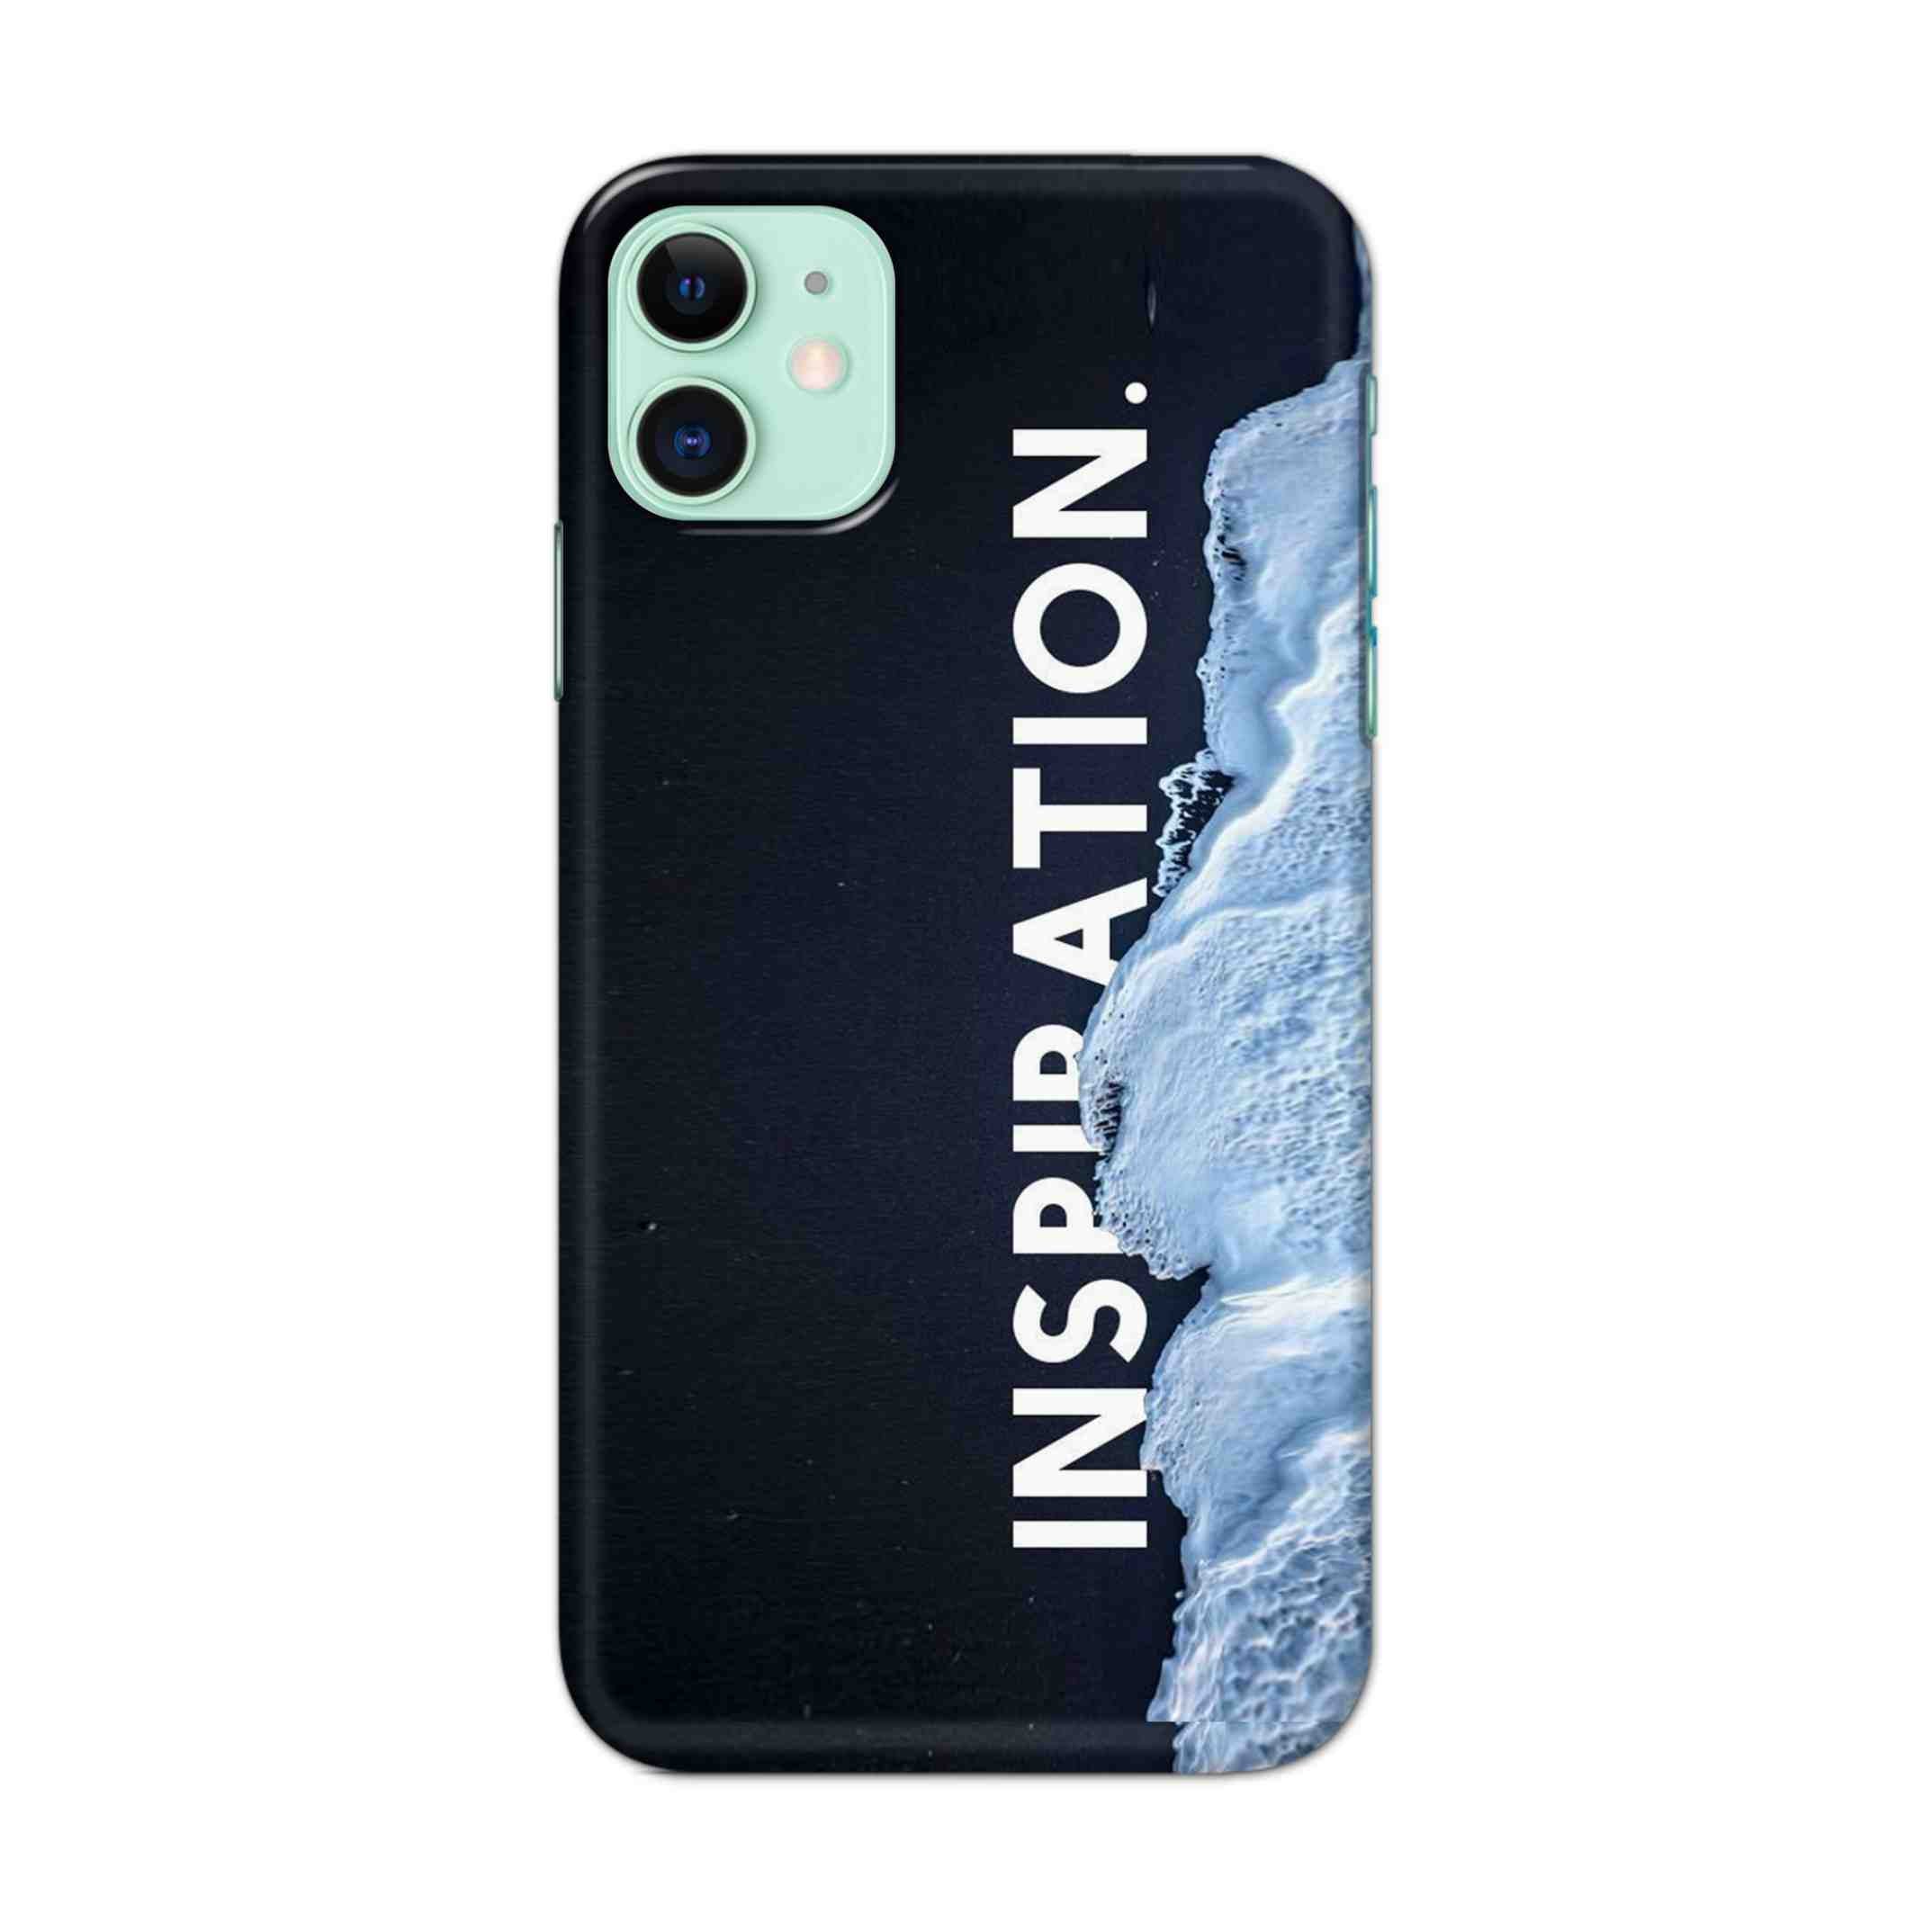 Buy Inspiration Hard Back Mobile Phone Case/Cover For iPhone 11 Online